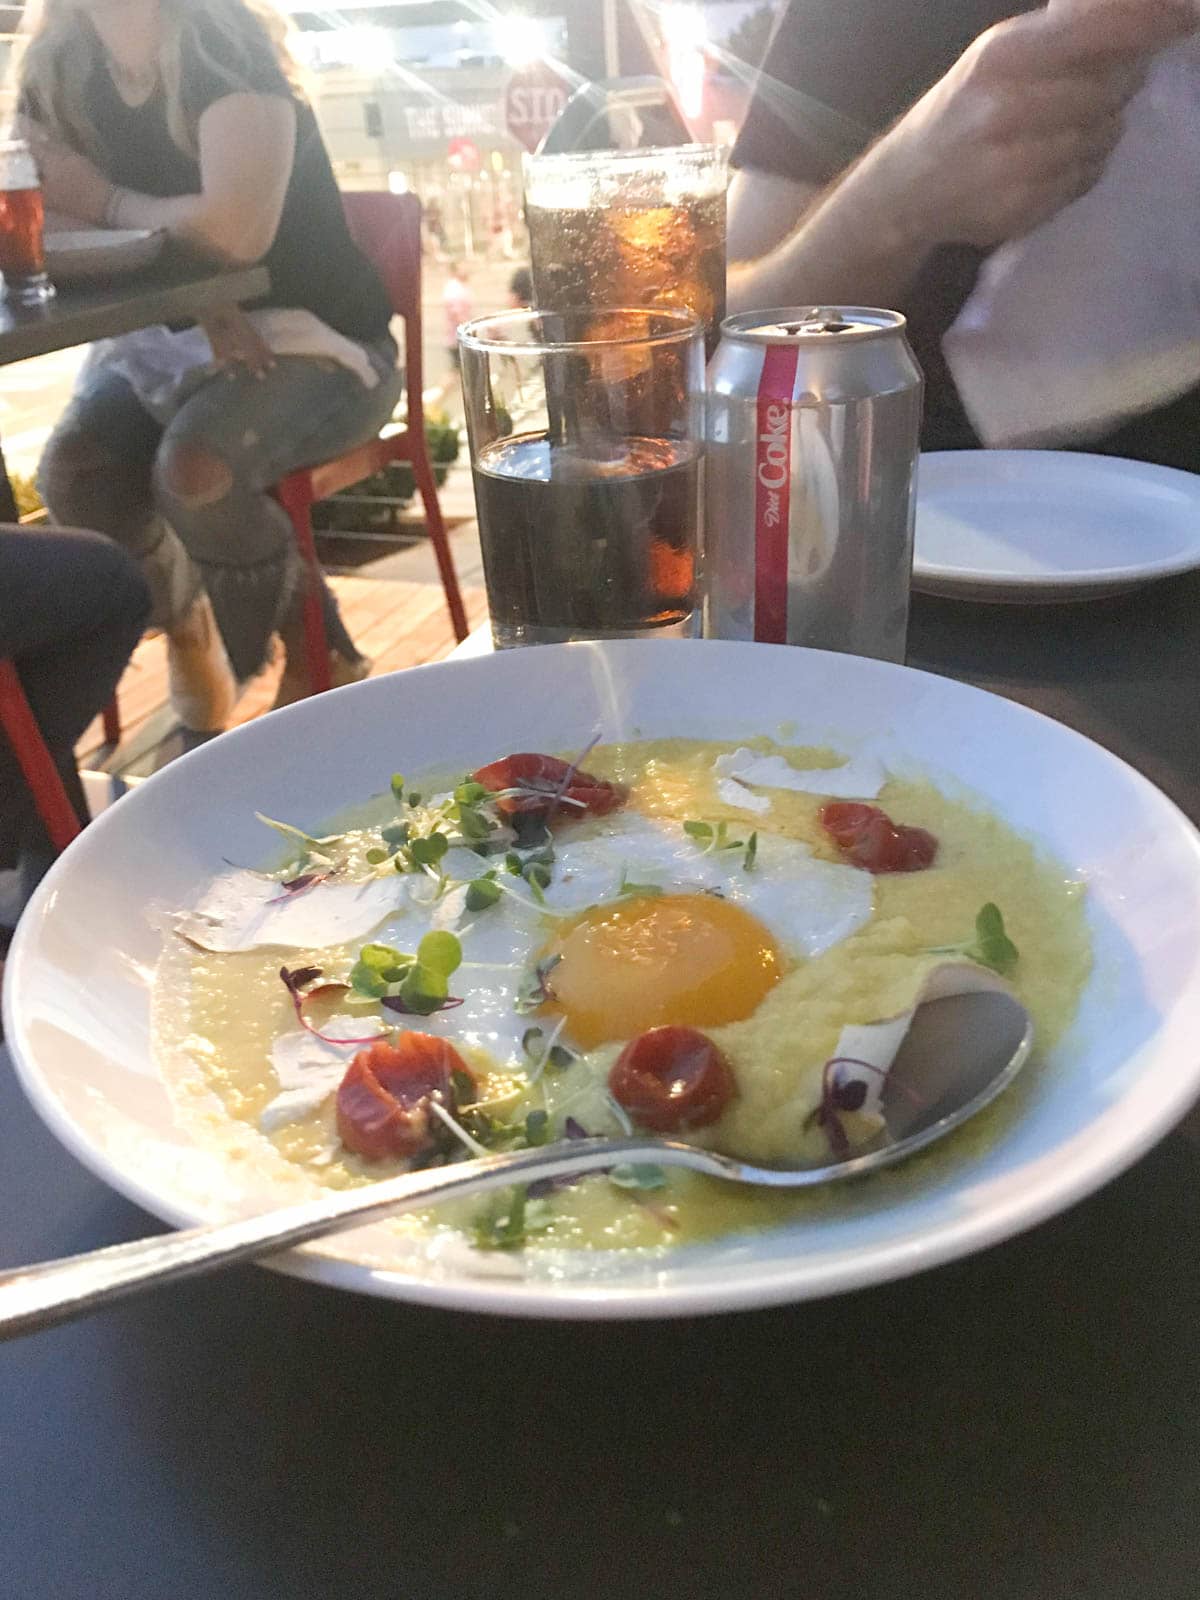 A white dish of polenta with tomatoes and an egg in the middle. It’s a dark evening setting and some Diet Coke can be seen in the background on the table.